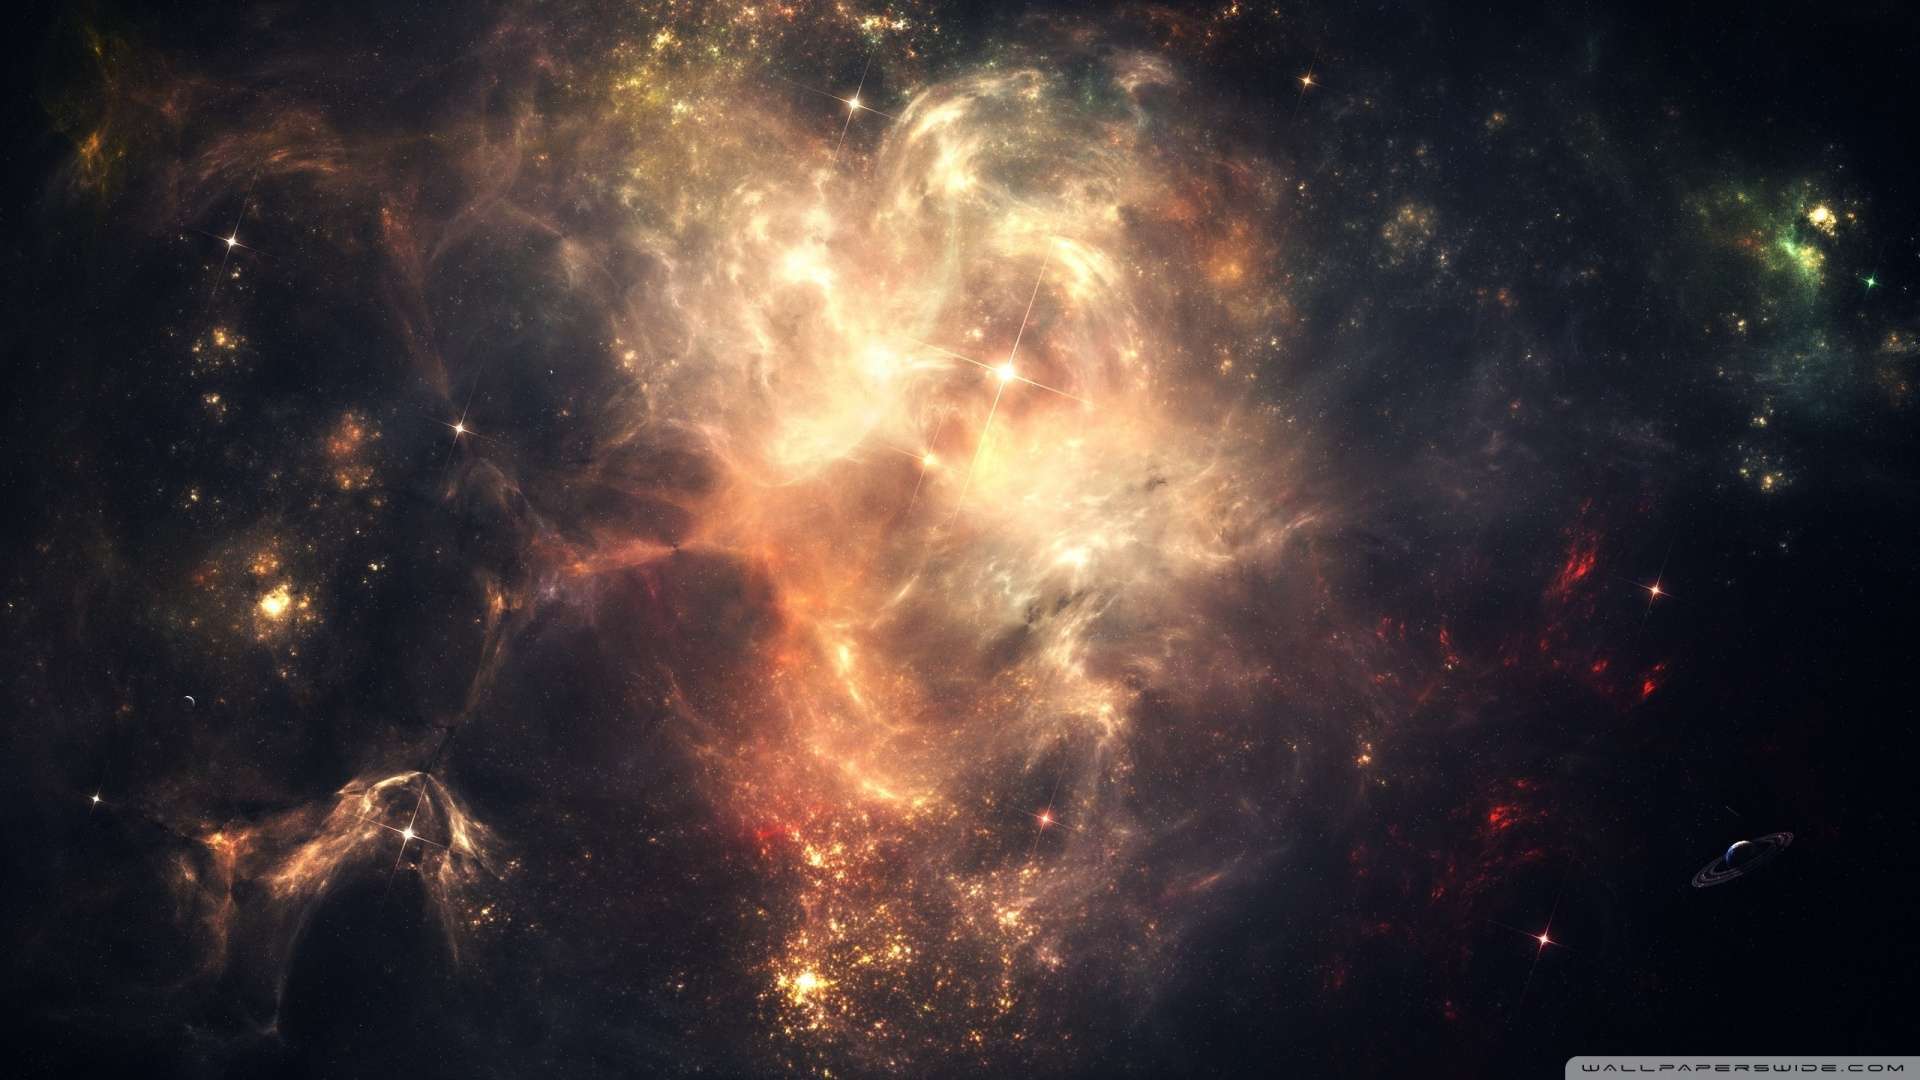 Wallpaper Outer Space Nebulae Wallpaper 1080p HD Upload at February 1920x1080